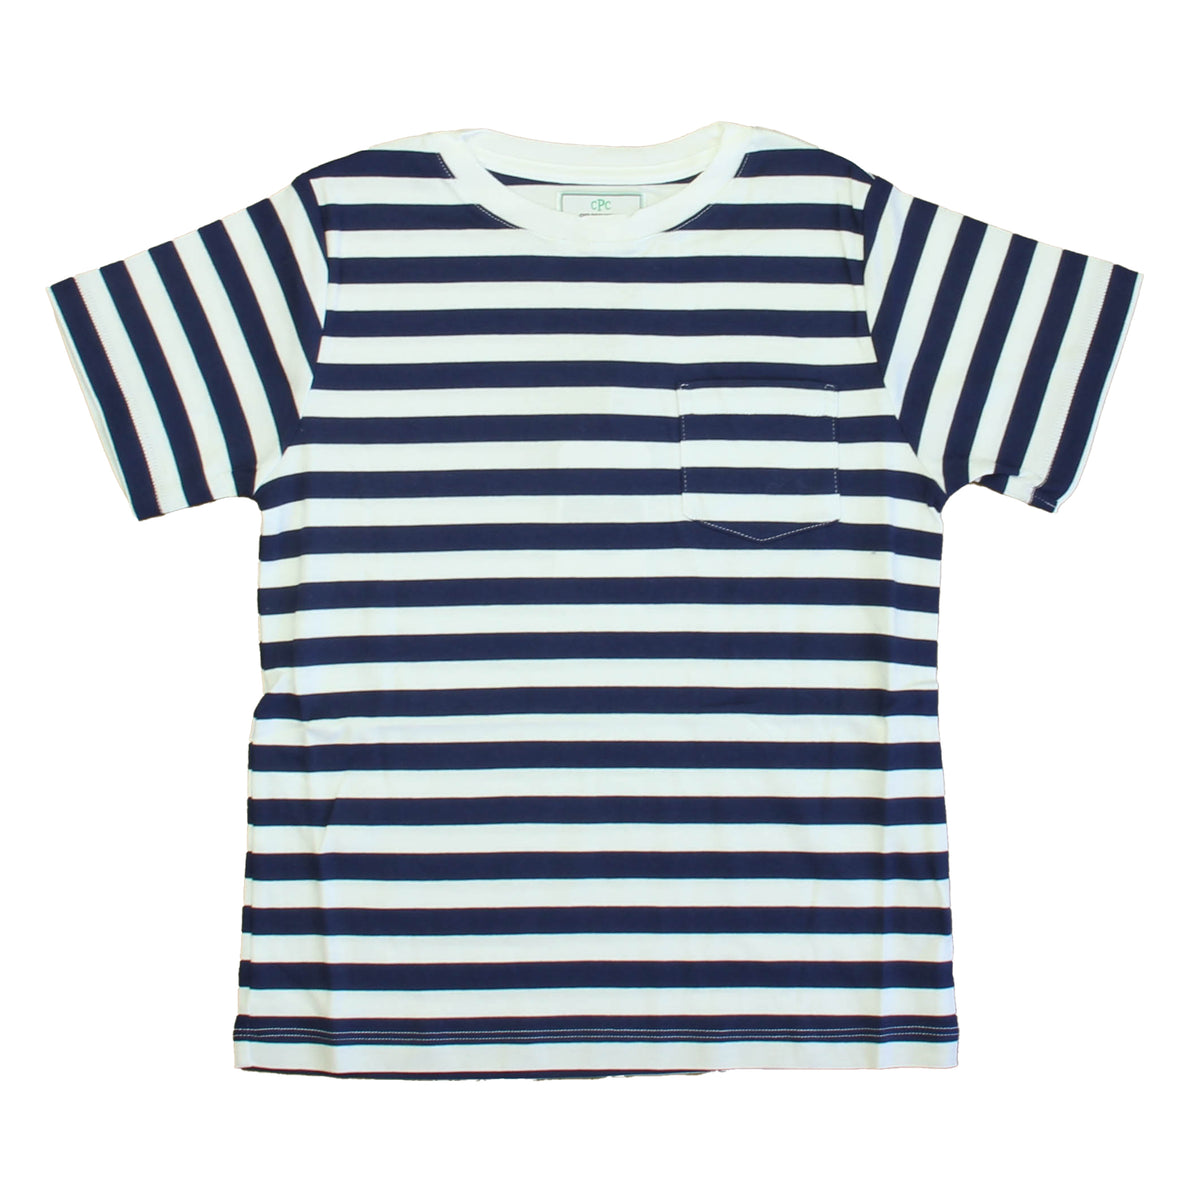 New with Tags: Medieval Blue Stripe T-Shirt -- FINAL SALE